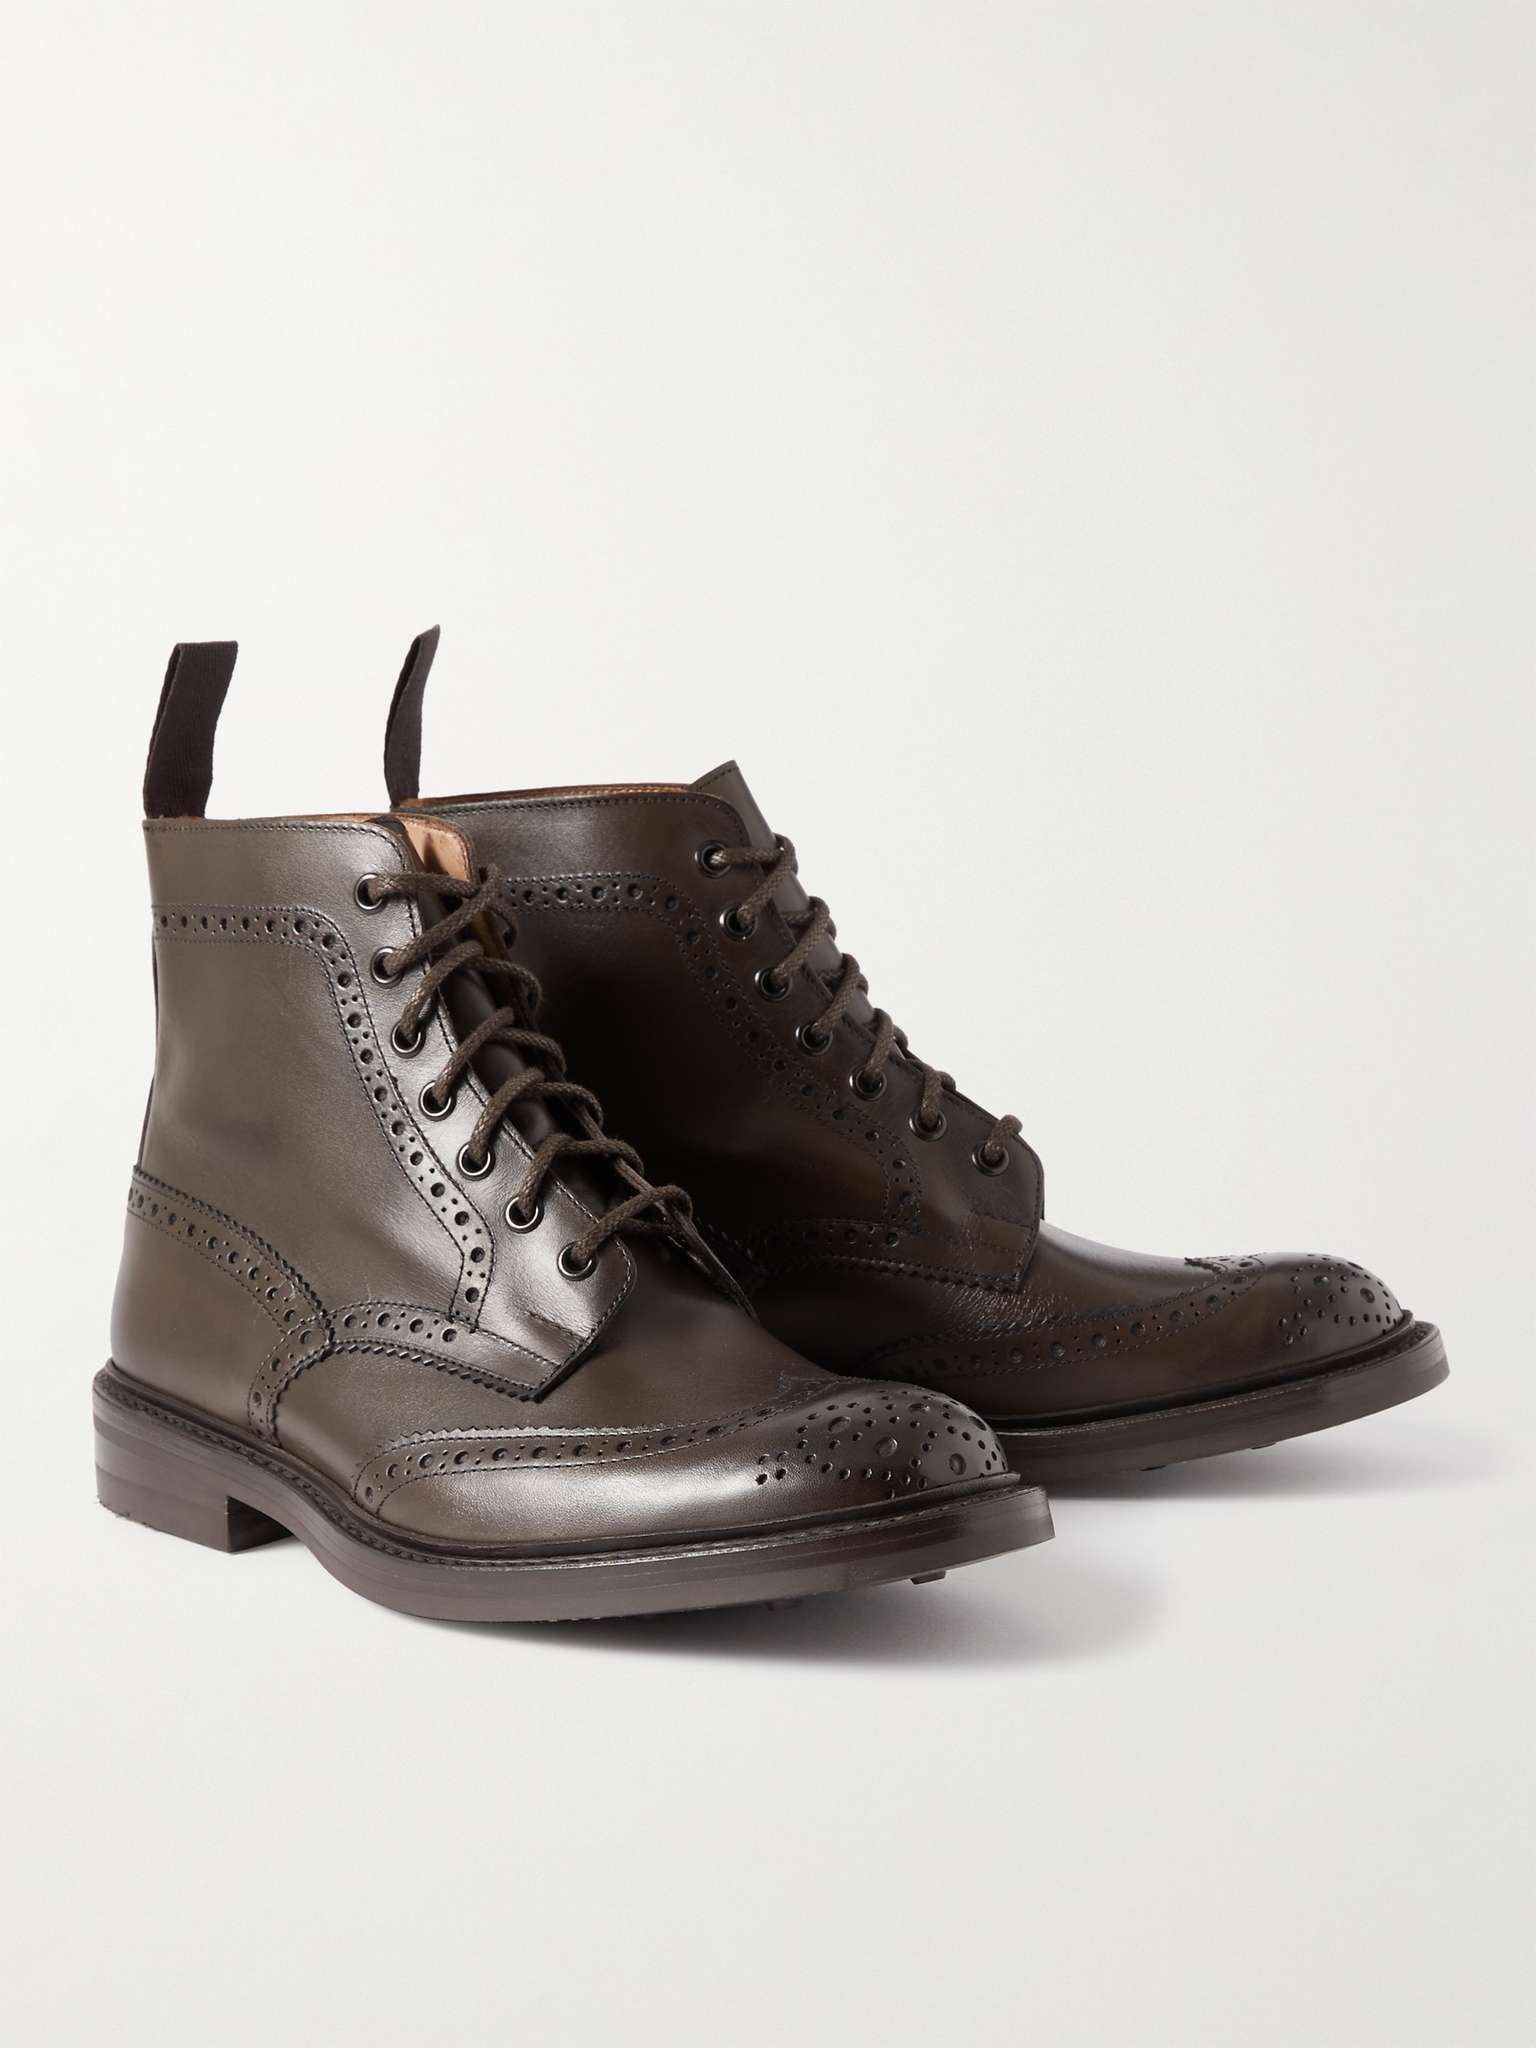 Stow Leather Brogue Boots - 4